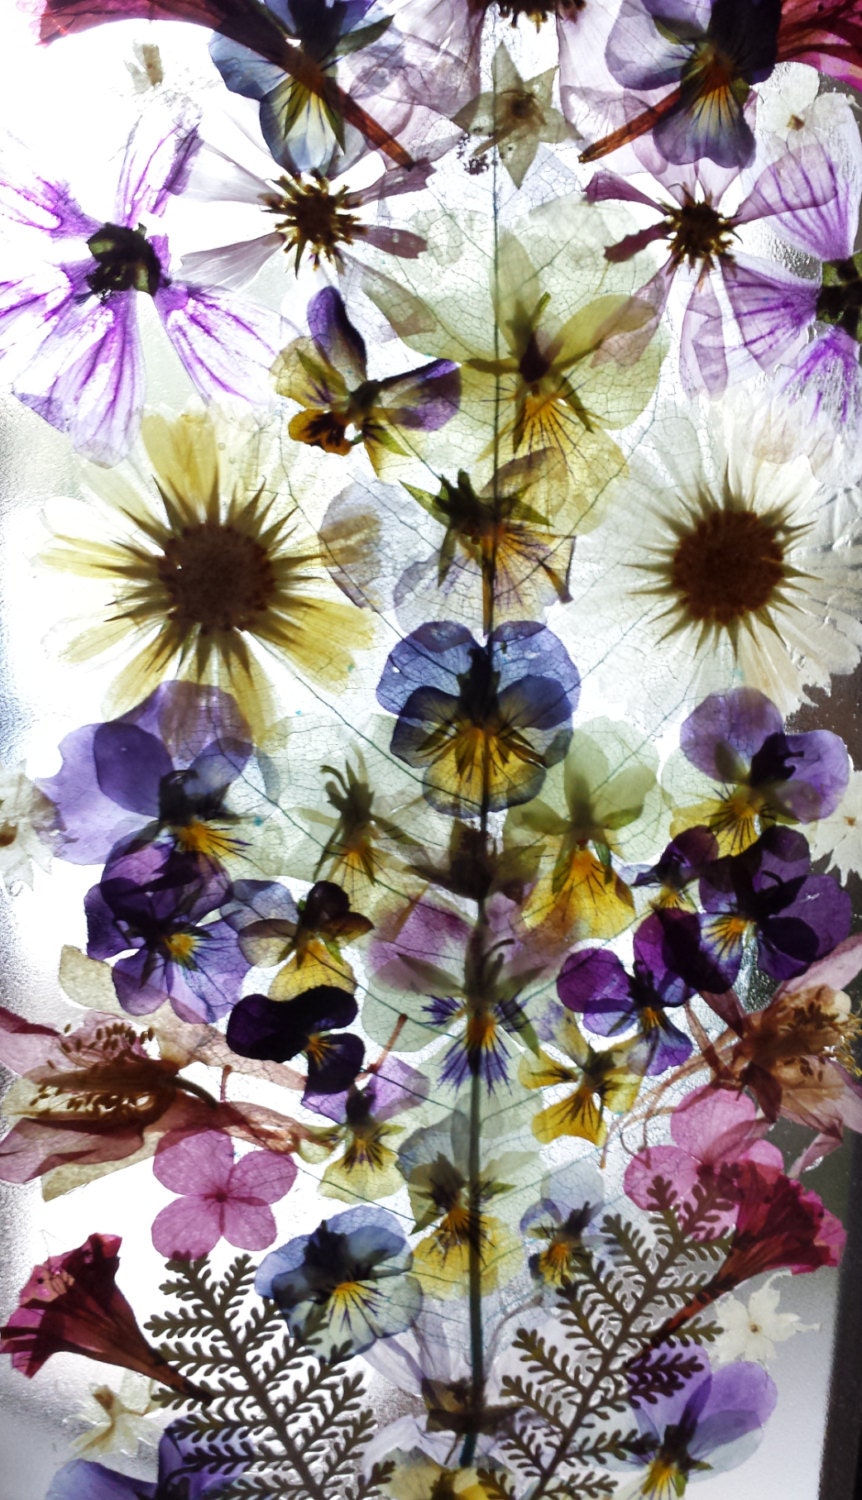 SALE Real Pressed Flower Collage on Glass in 7 x 13 Floating